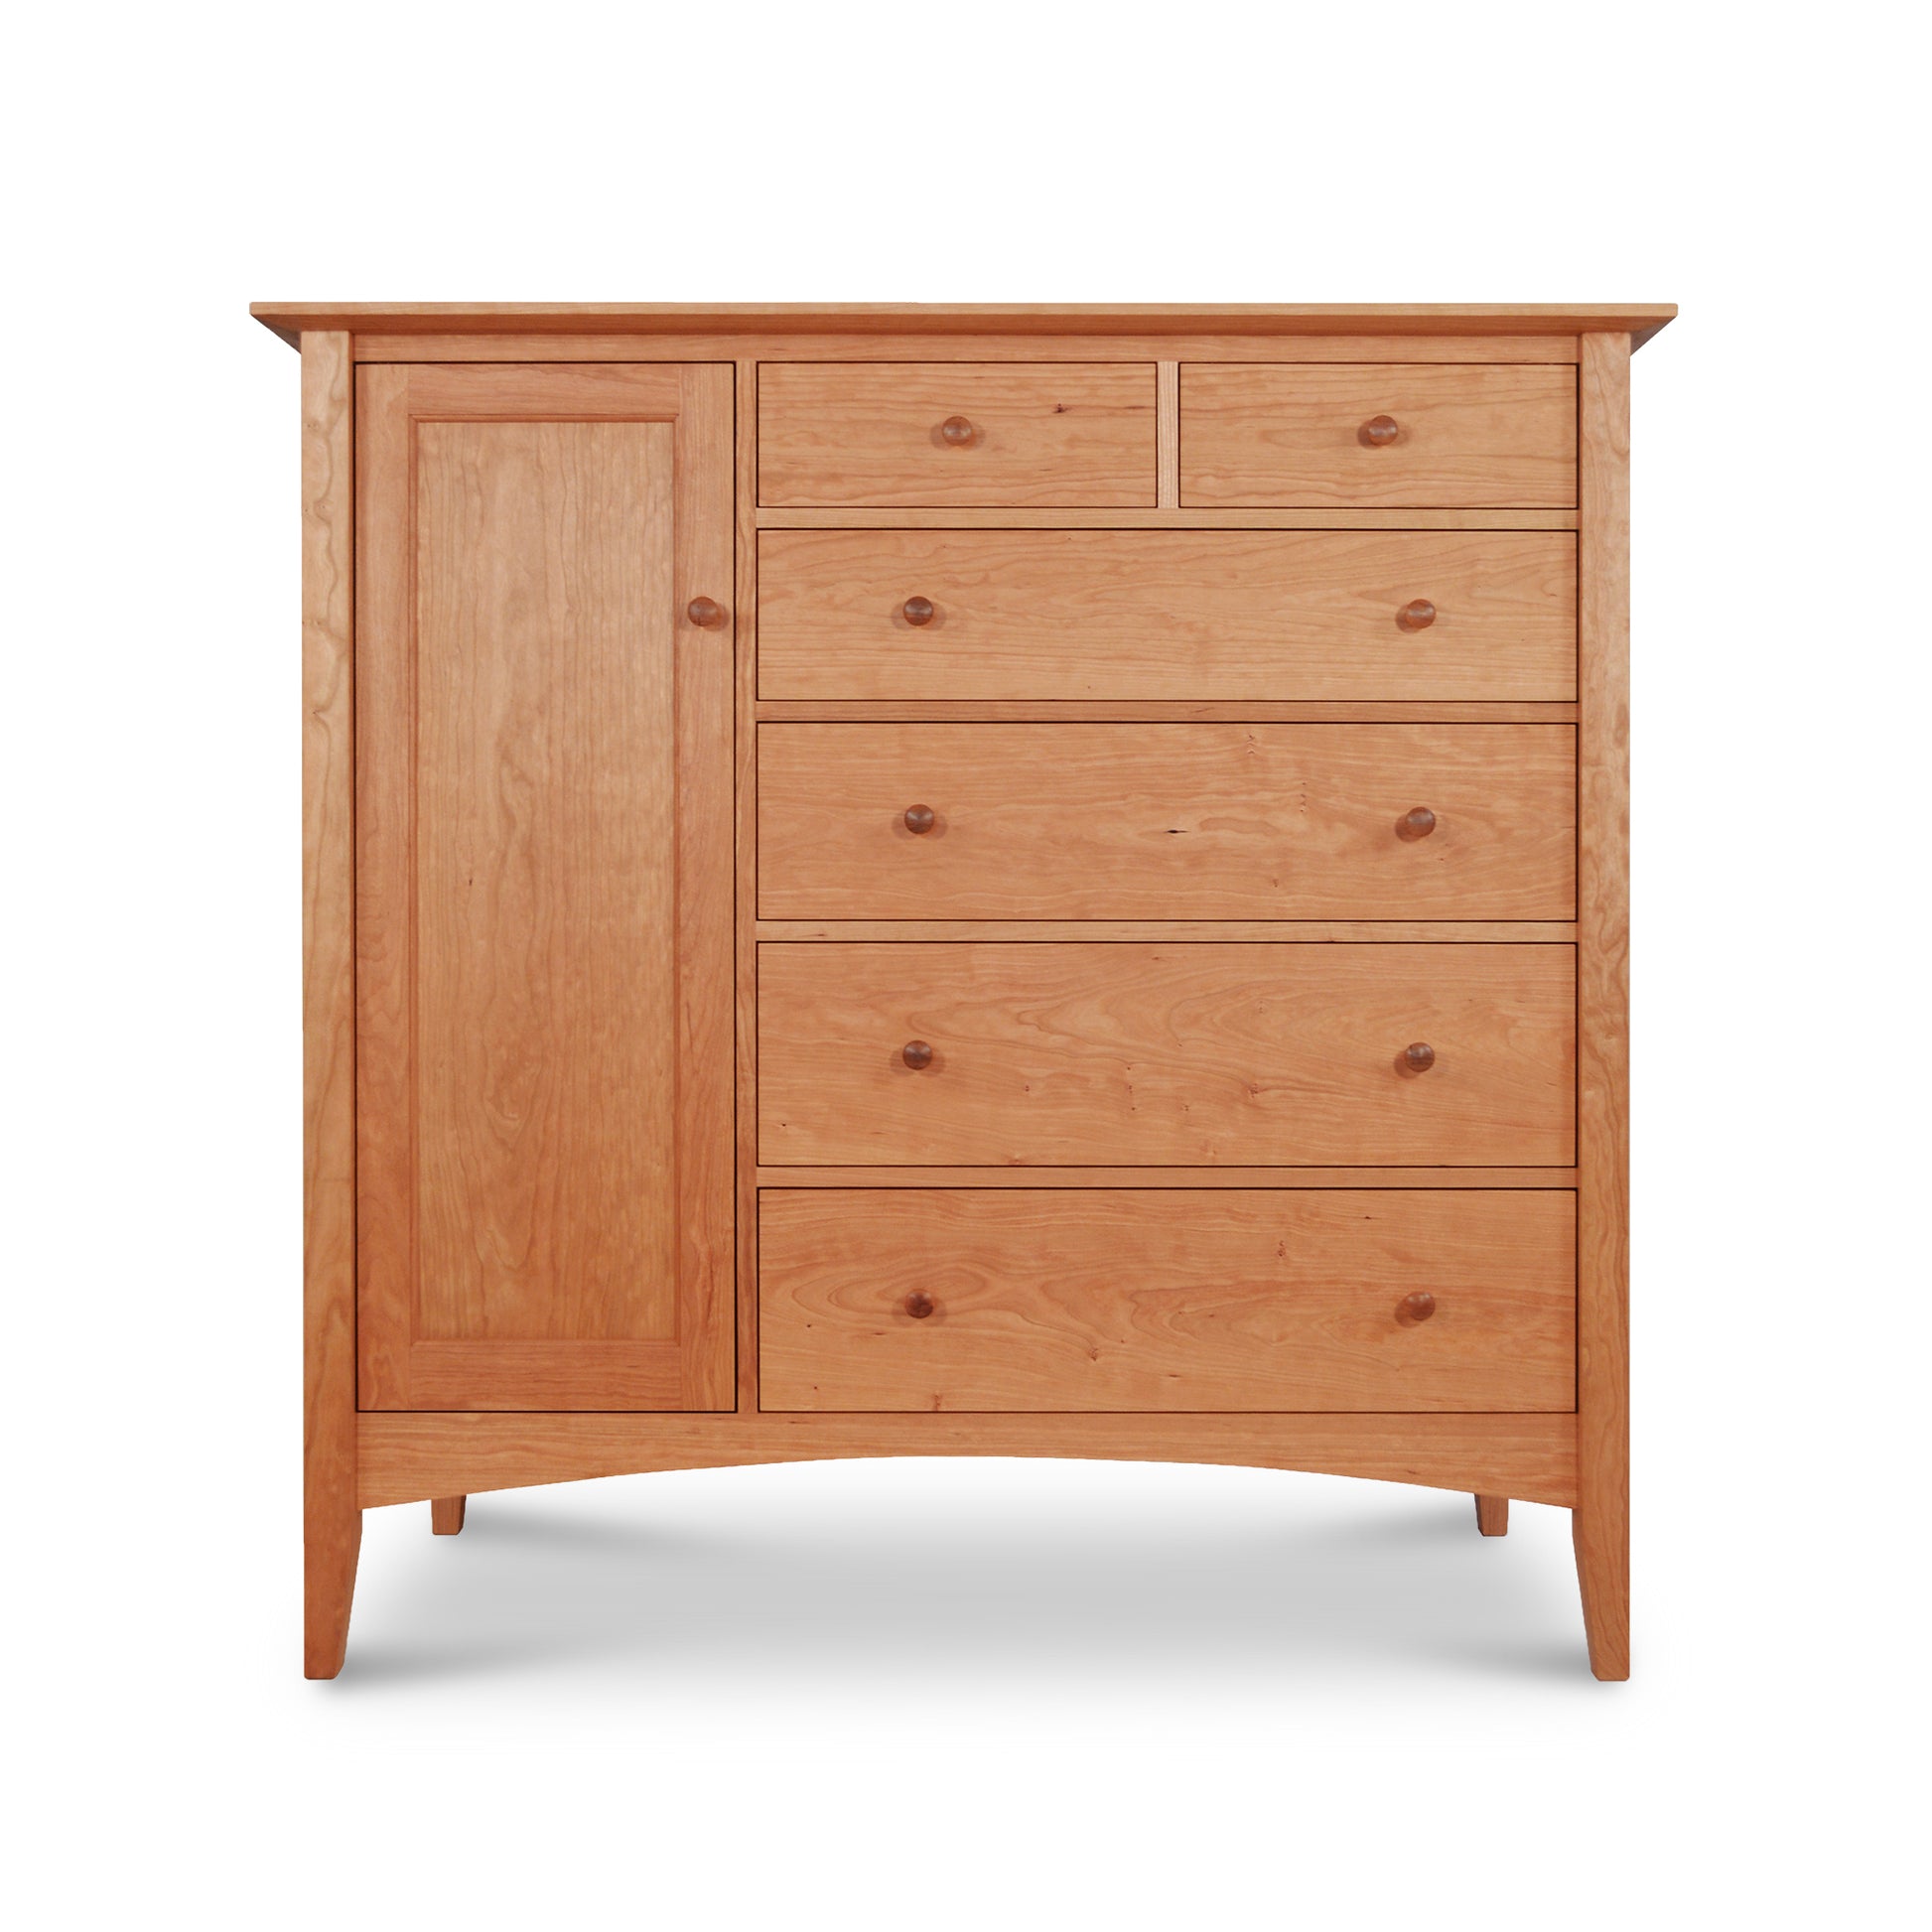 A Maple Corner Woodworks American Shaker Gent's Chest, showcasing Vermont craftsmanship. This wooden dresser features drawers and a door, making it an elegant addition to any upscale bedroom.